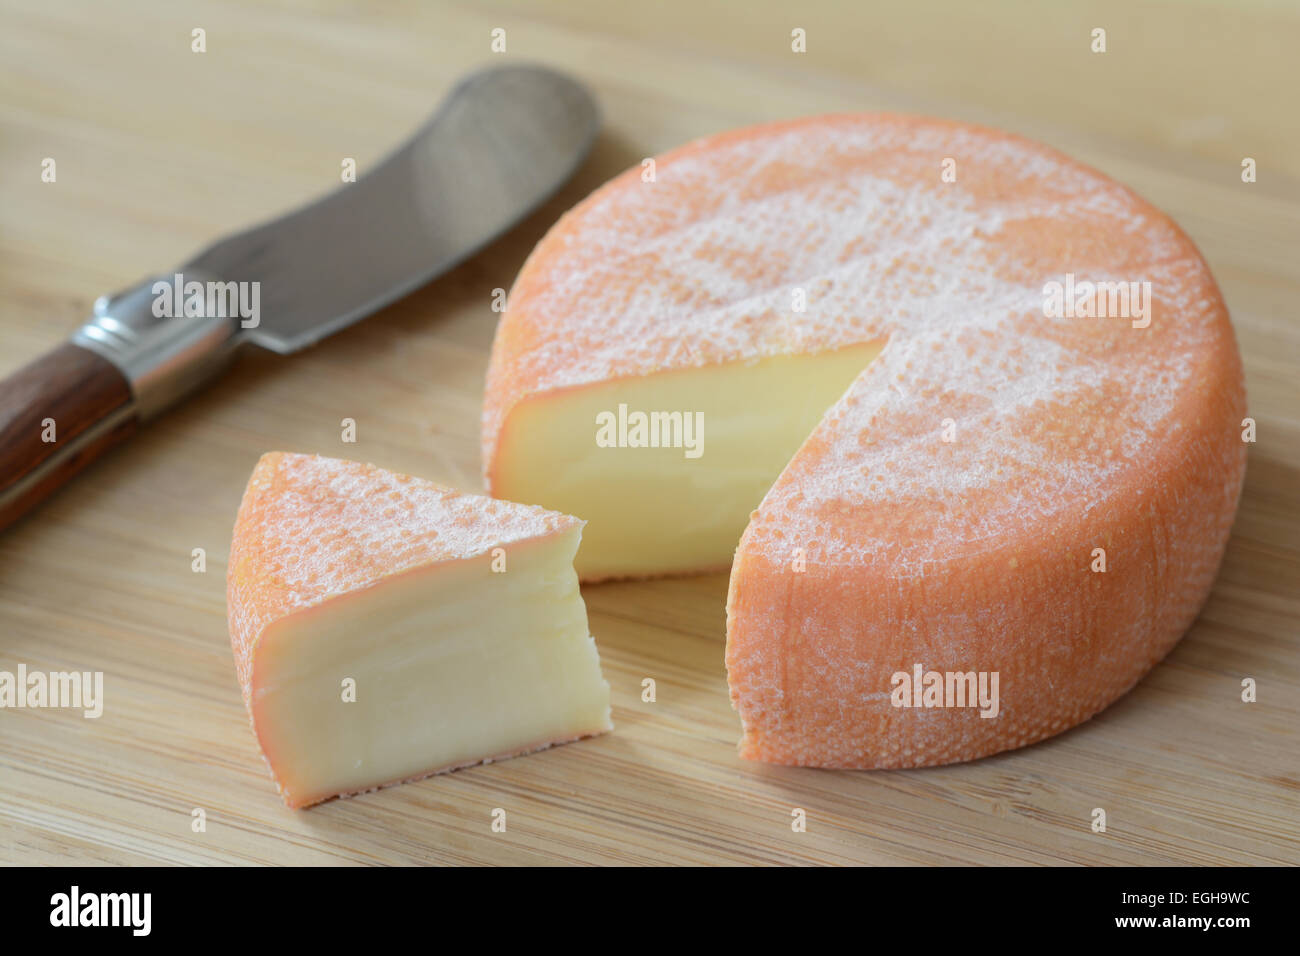 A full wheel brie cheese with one slice cut and a knife Stock Photo